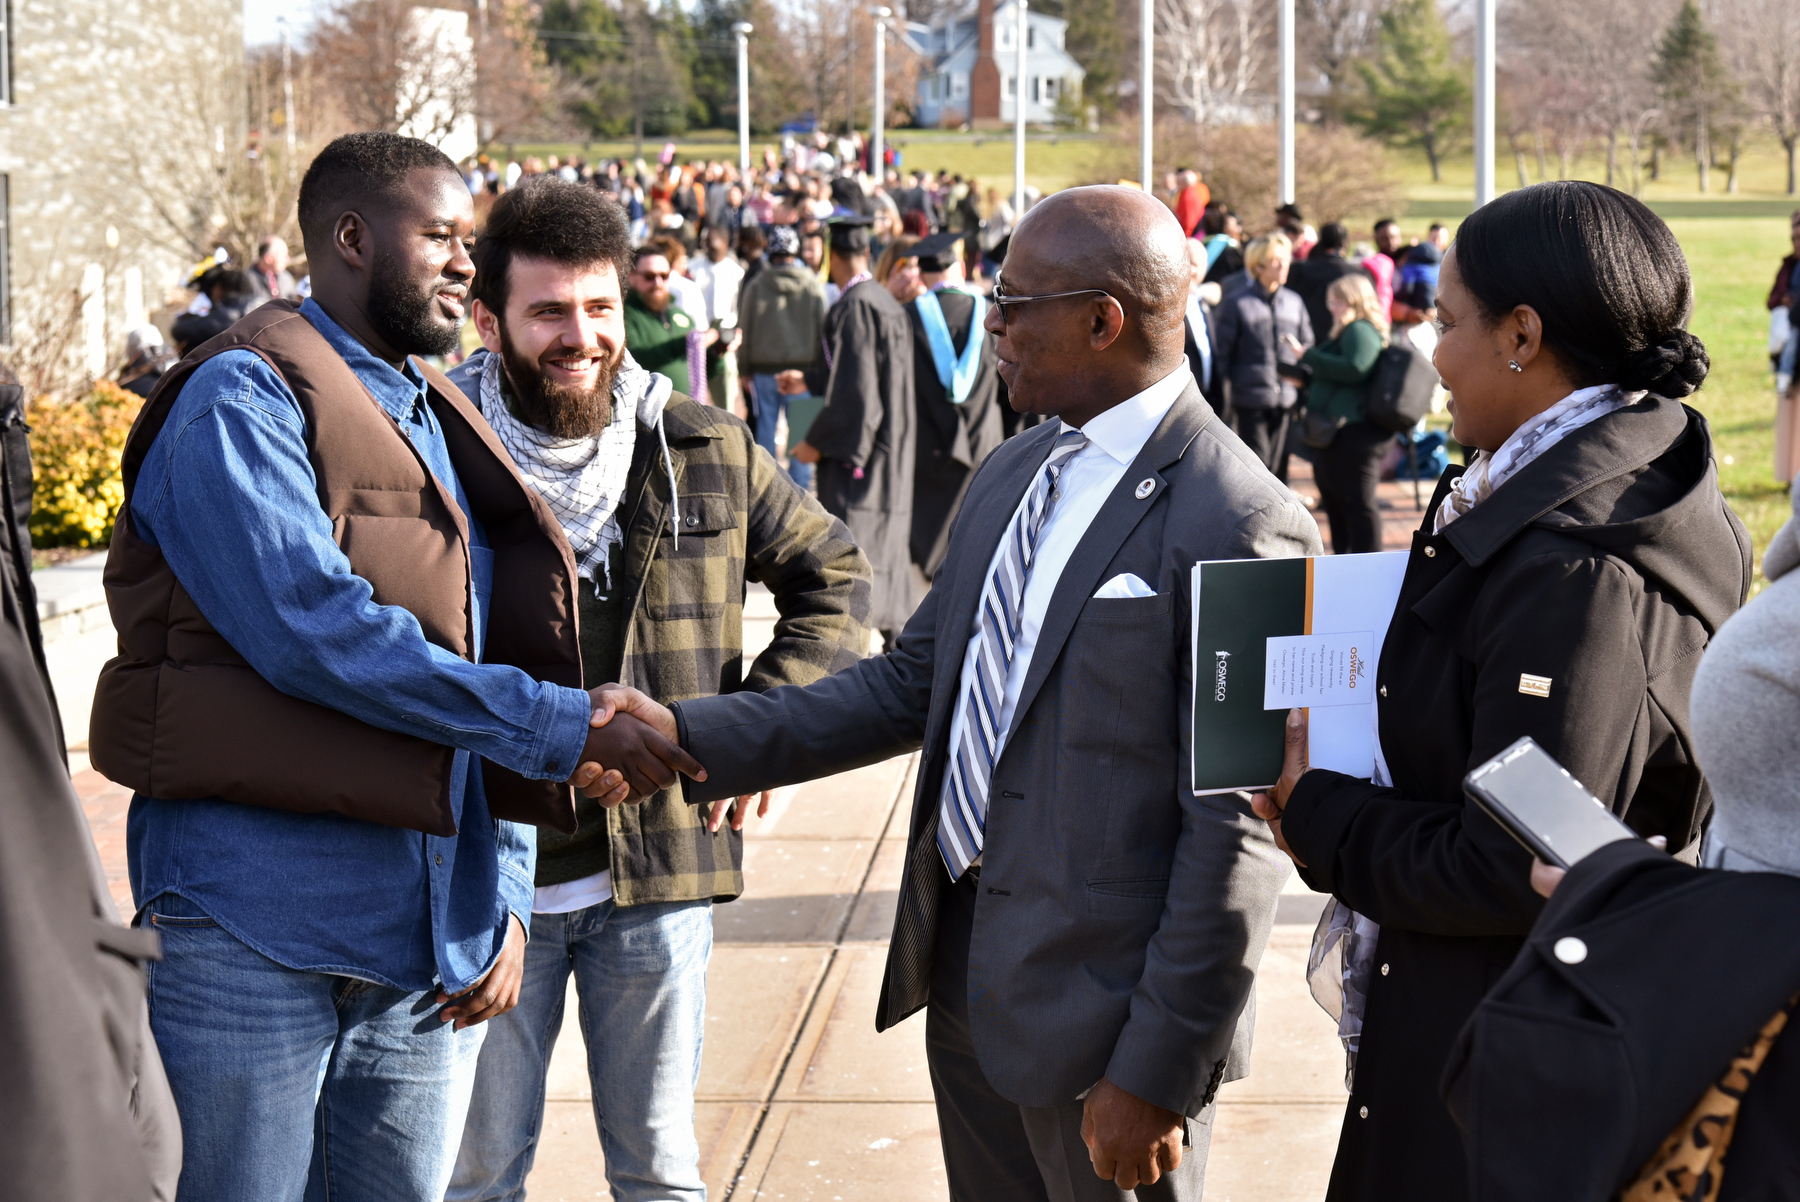 Families, friends and alumni gather outside the Marano Campus Center after the Dec. 16 Commencement ceremony on a relatively warm and sunny day. Pictured, President Peter O. Nwosu greets Yahya Ndiaye, a 2022 graduate in Oswego's electrical and computer engineering program, and other visiting alumni and supporters.